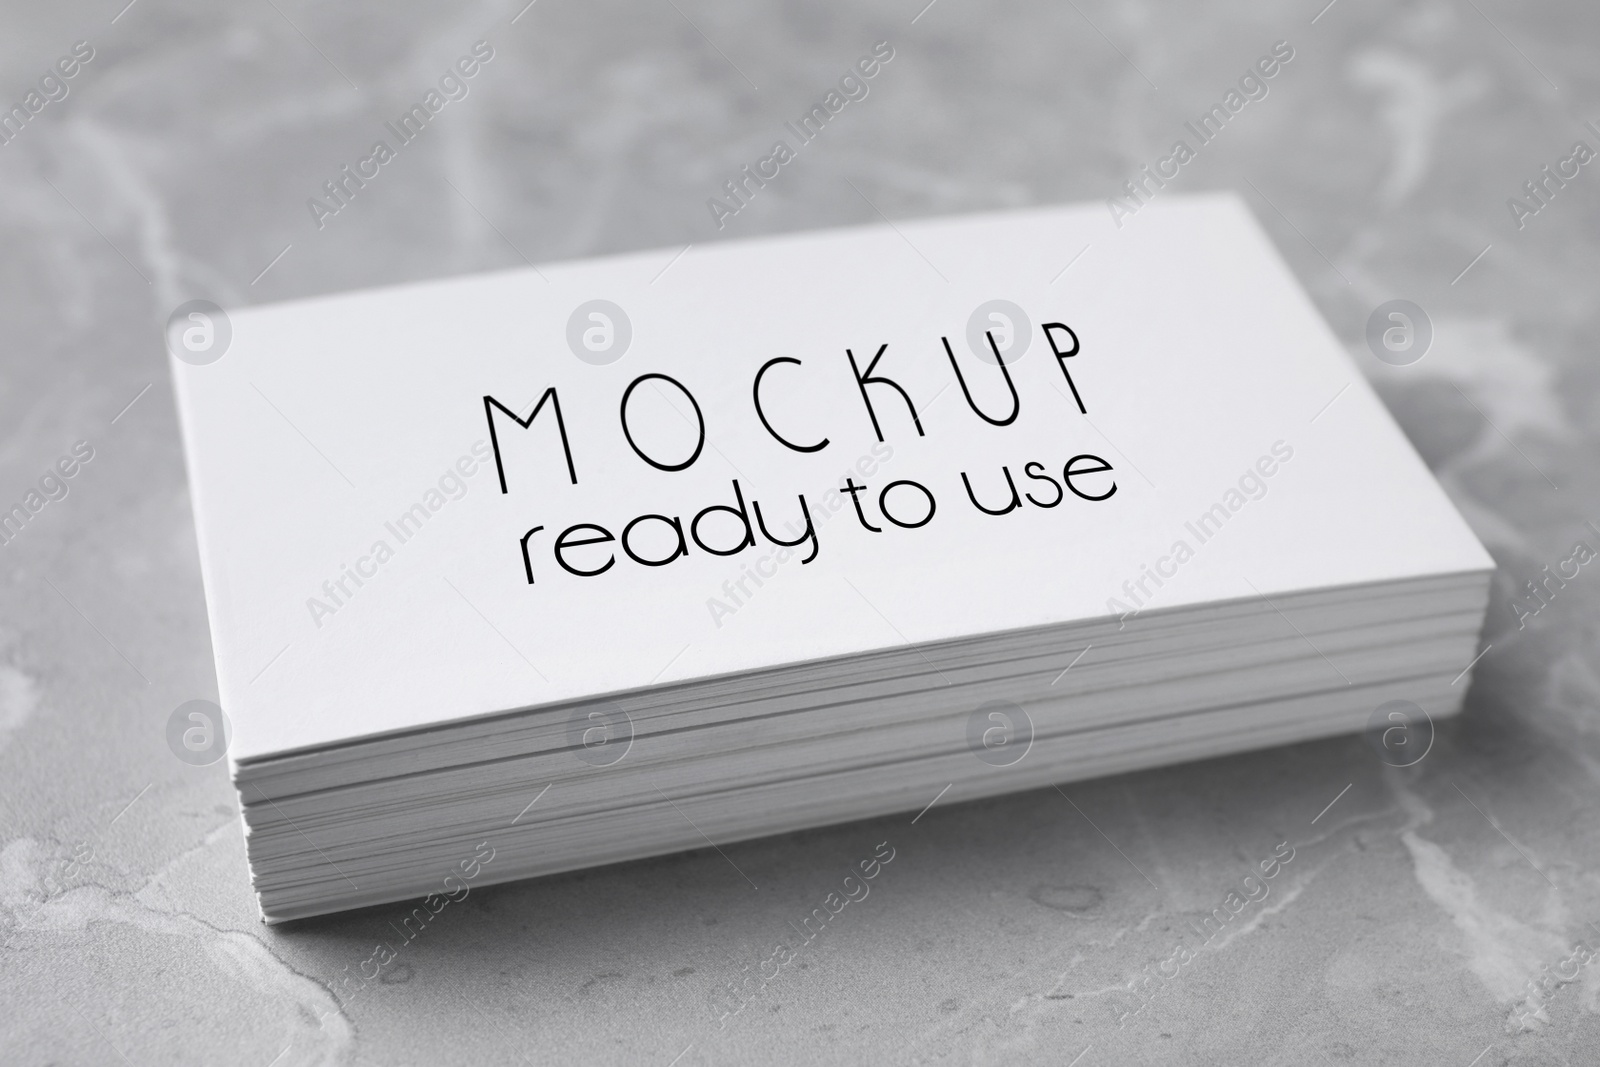 Image of Stack of business cards with text Mockup Ready To Use on top